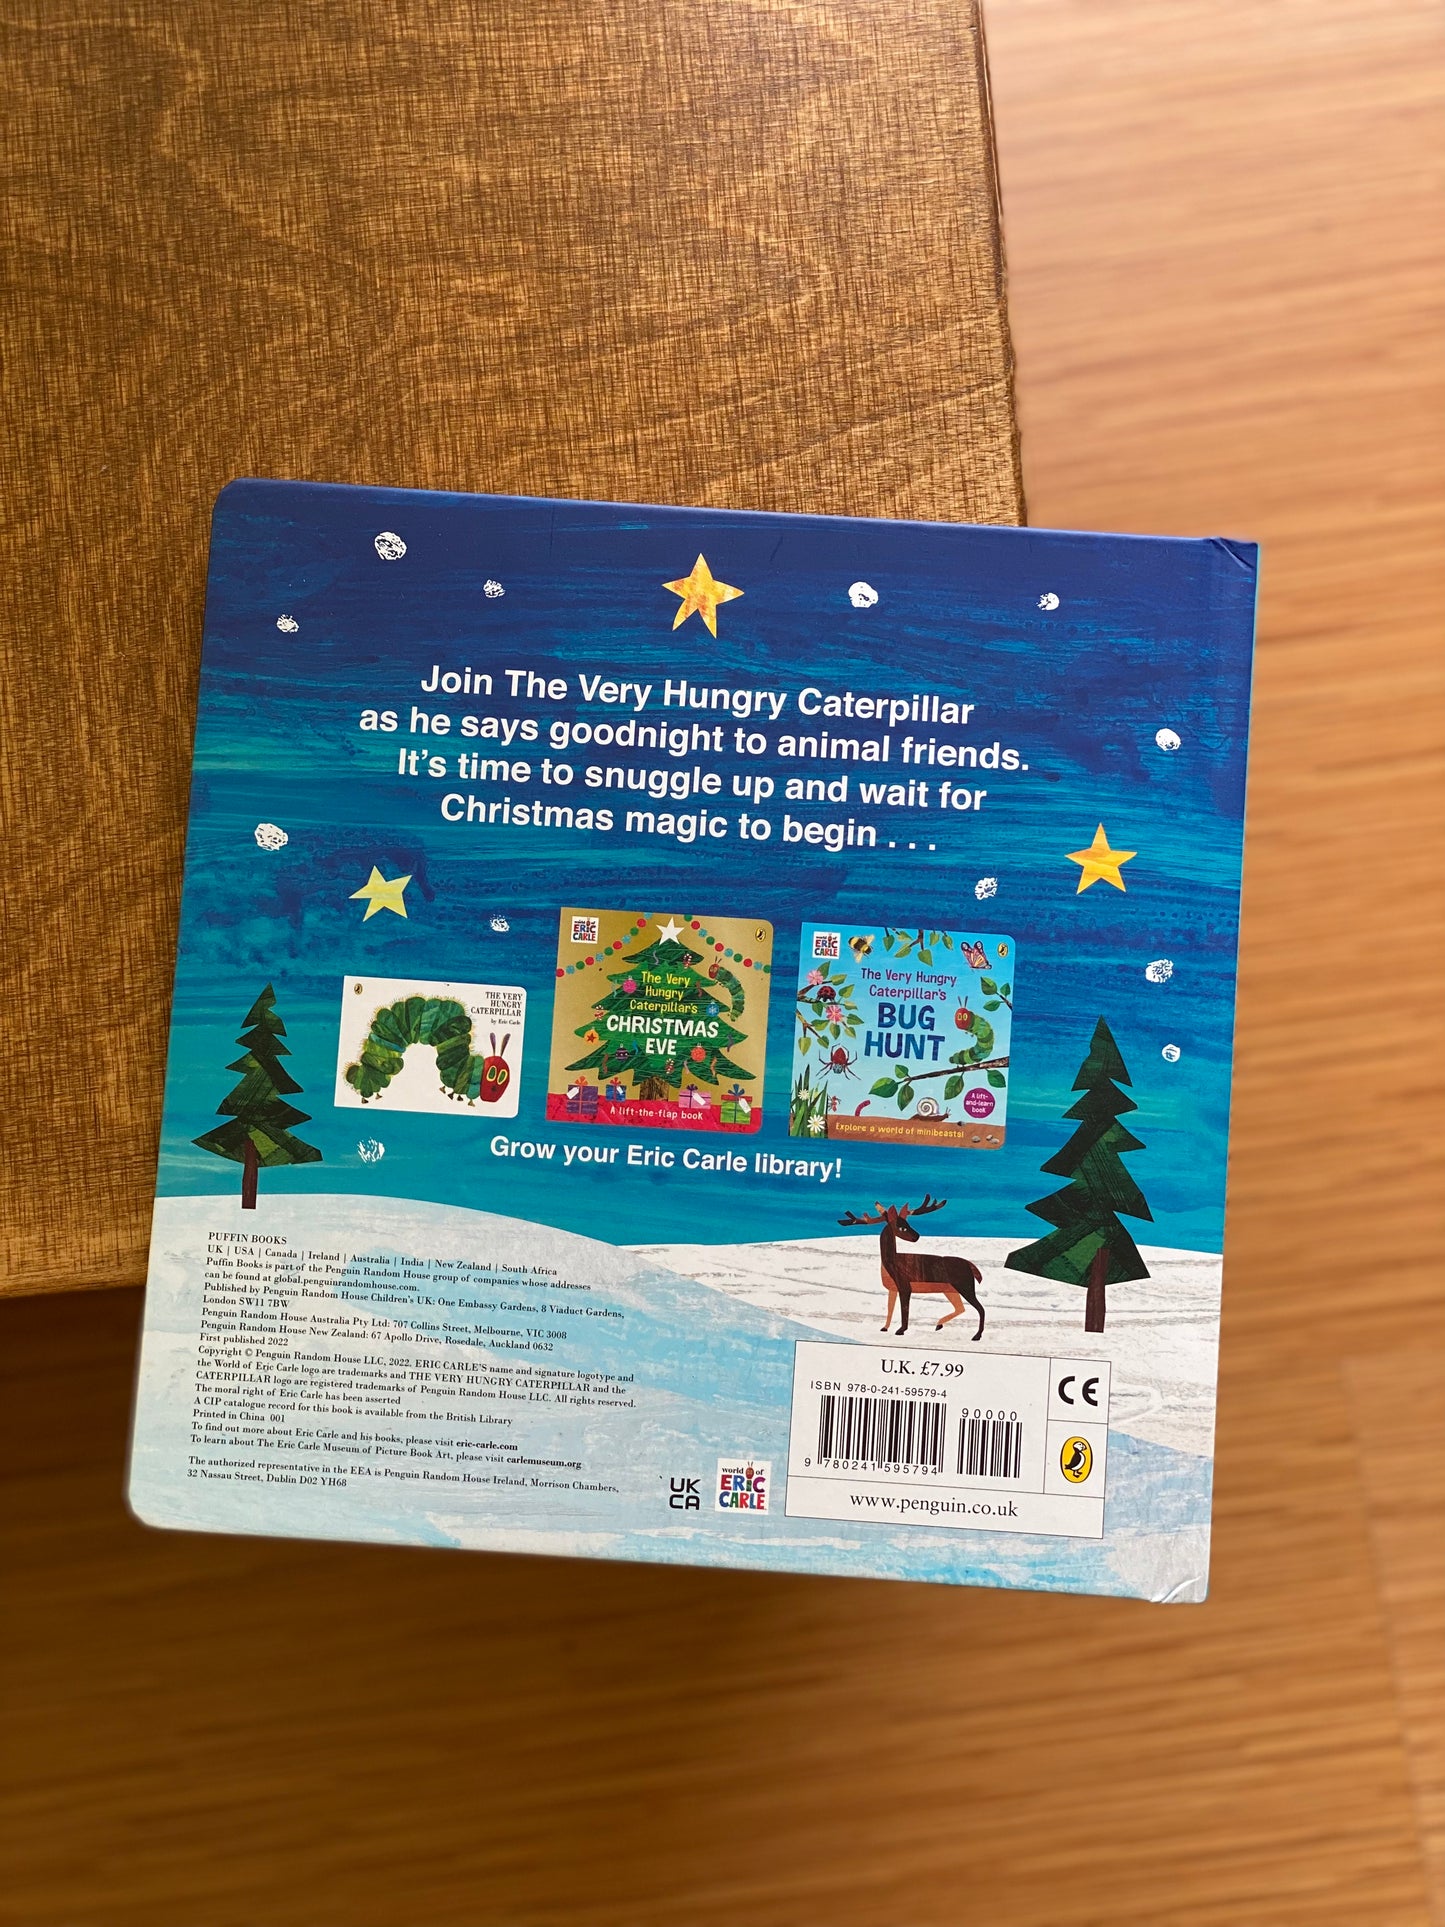 The Very Hungry Caterpillar's Night Before Christmas A lift-the-flap book [Book]